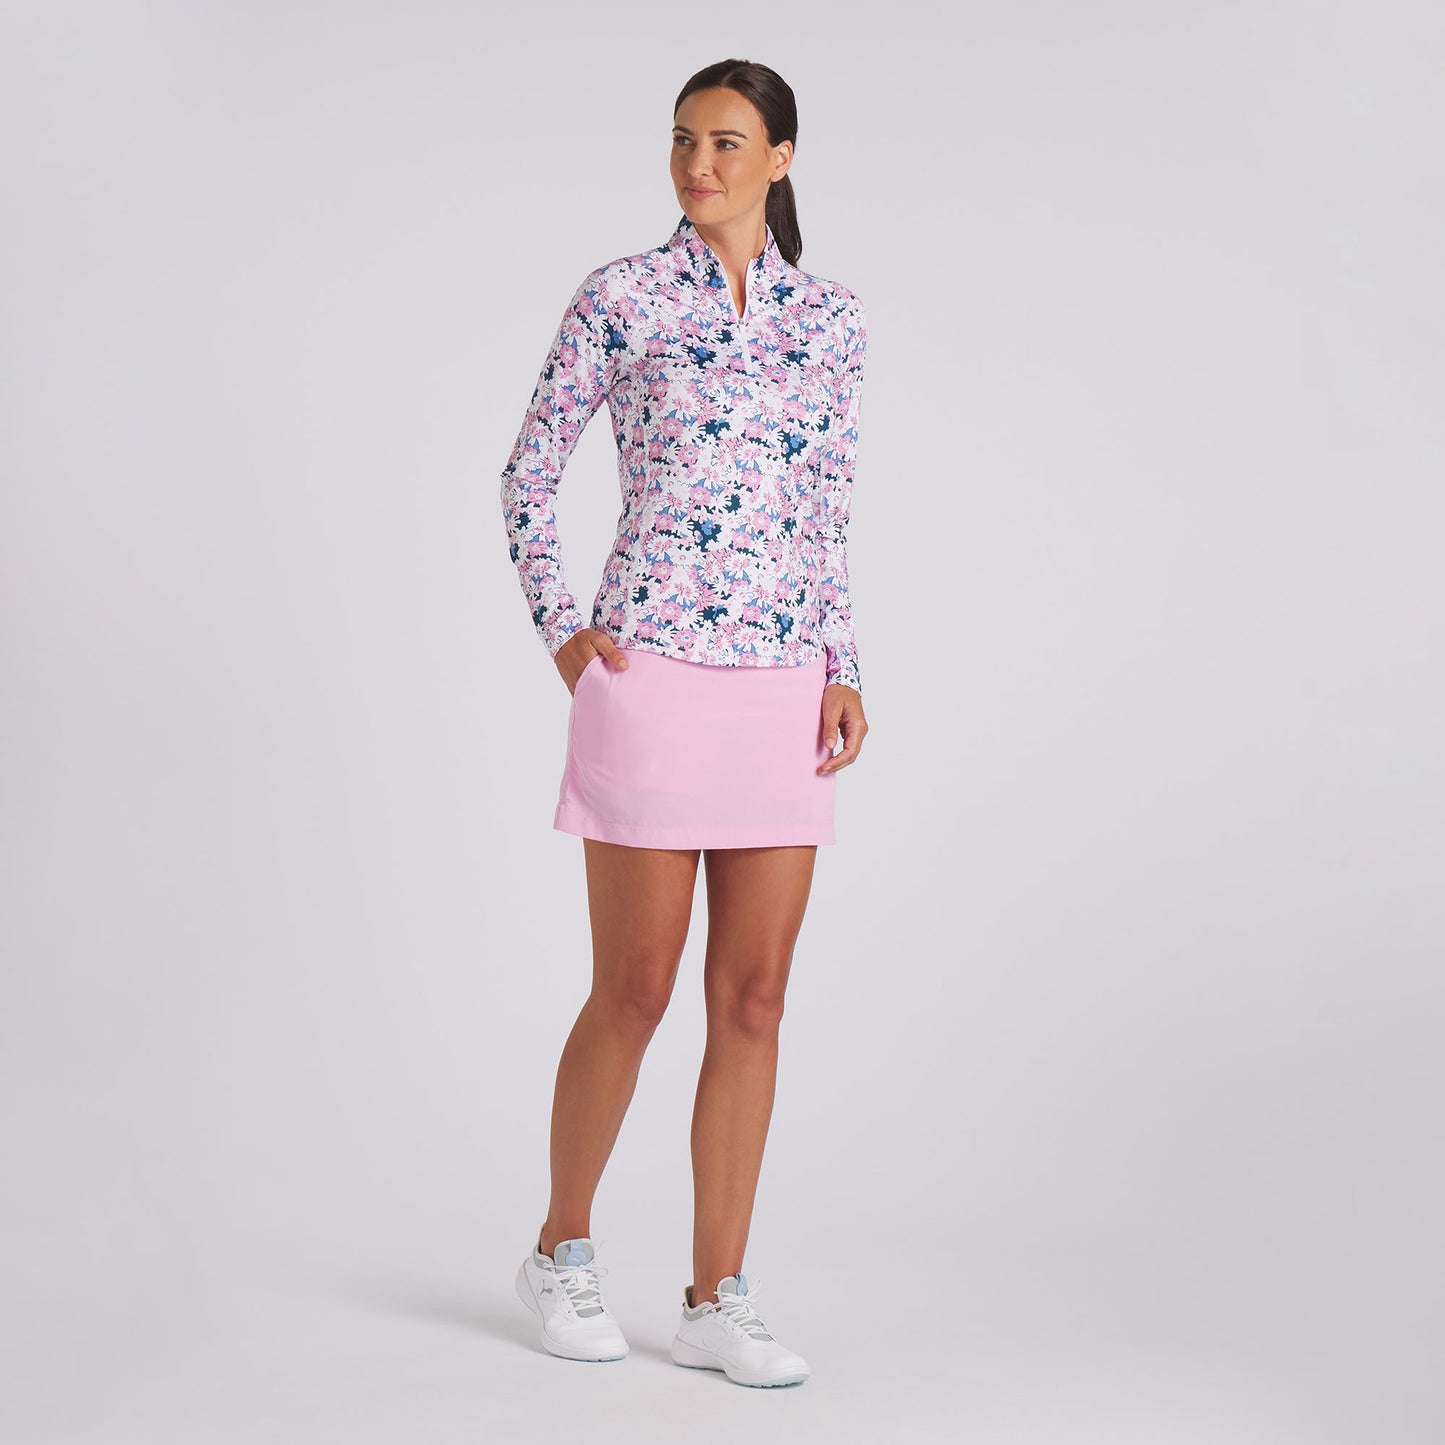 Puma Women's YOU-V Bloom Print Top with UPF 50+ in Pink Icing-White Glow